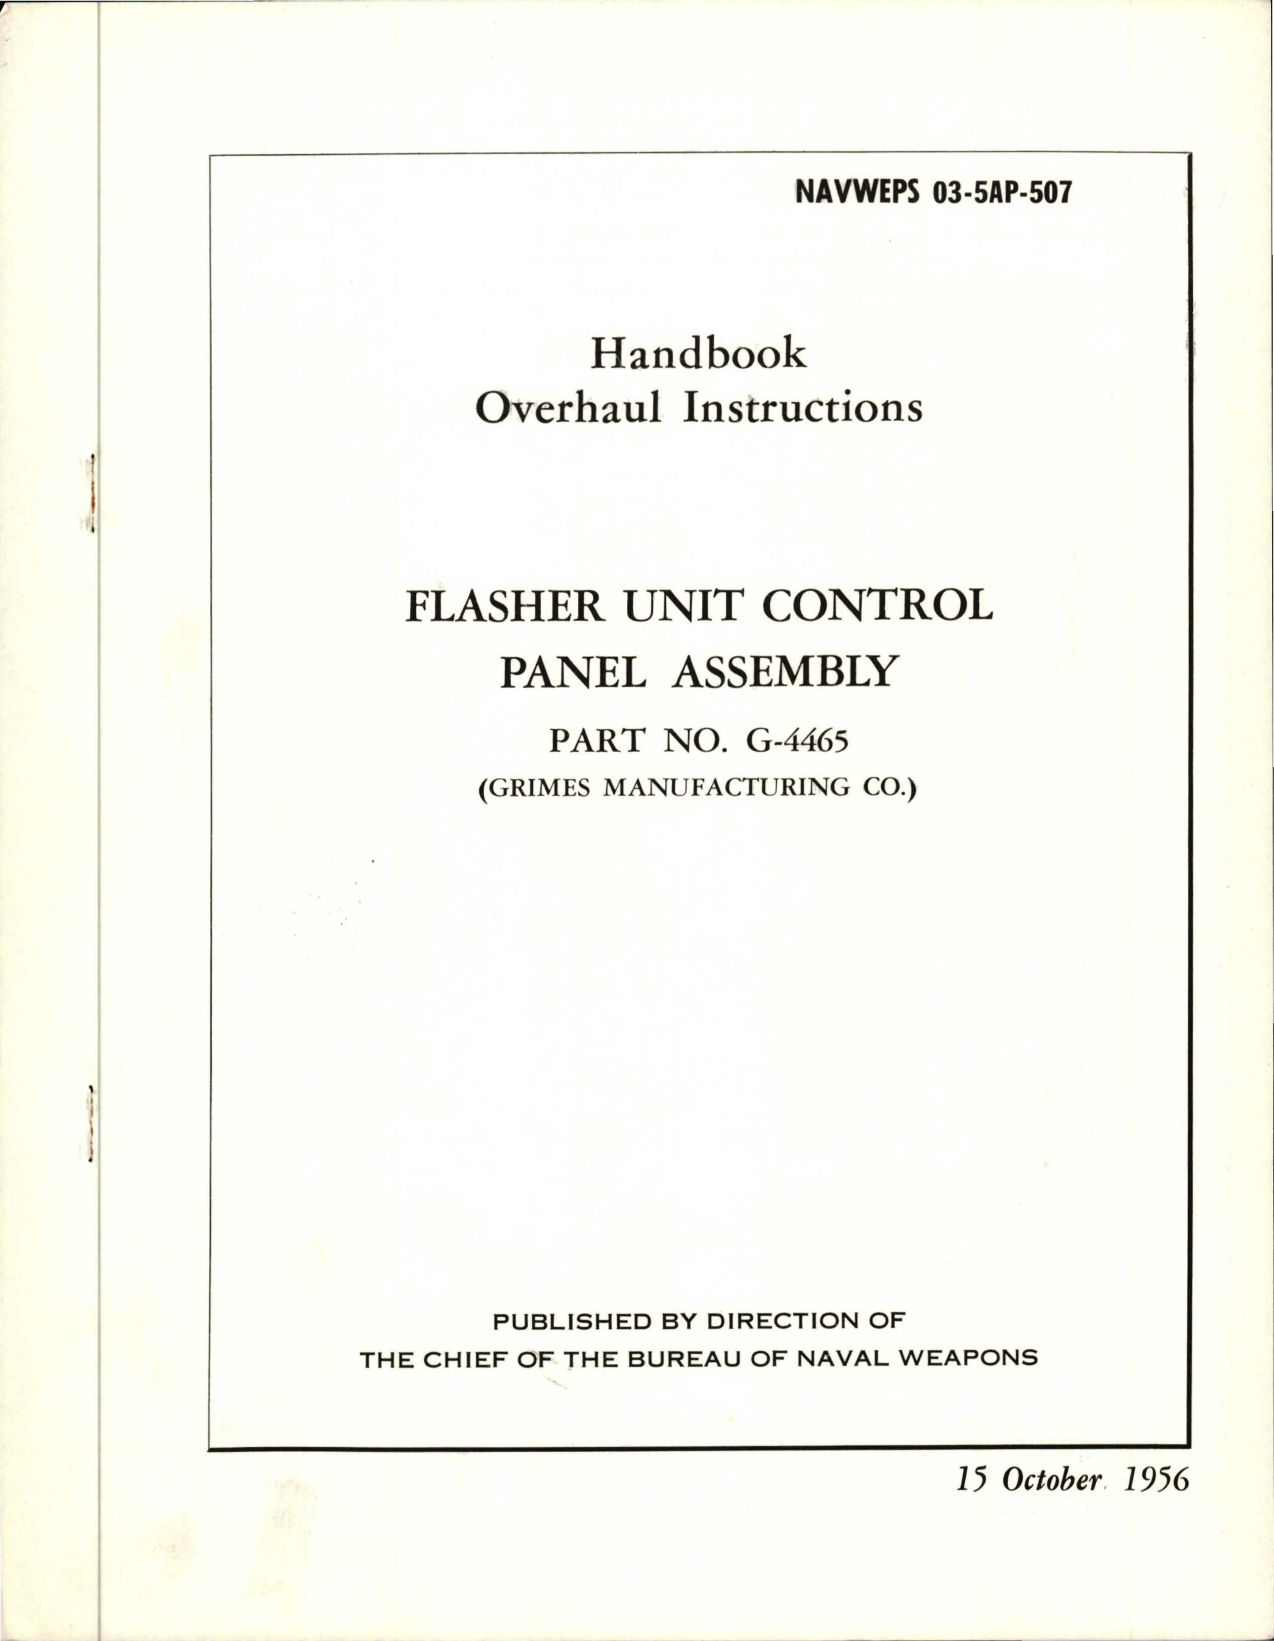 Sample page 1 from AirCorps Library document: Overhaul Instructions for Flasher Unit Control Panel Assy - Part G-4465